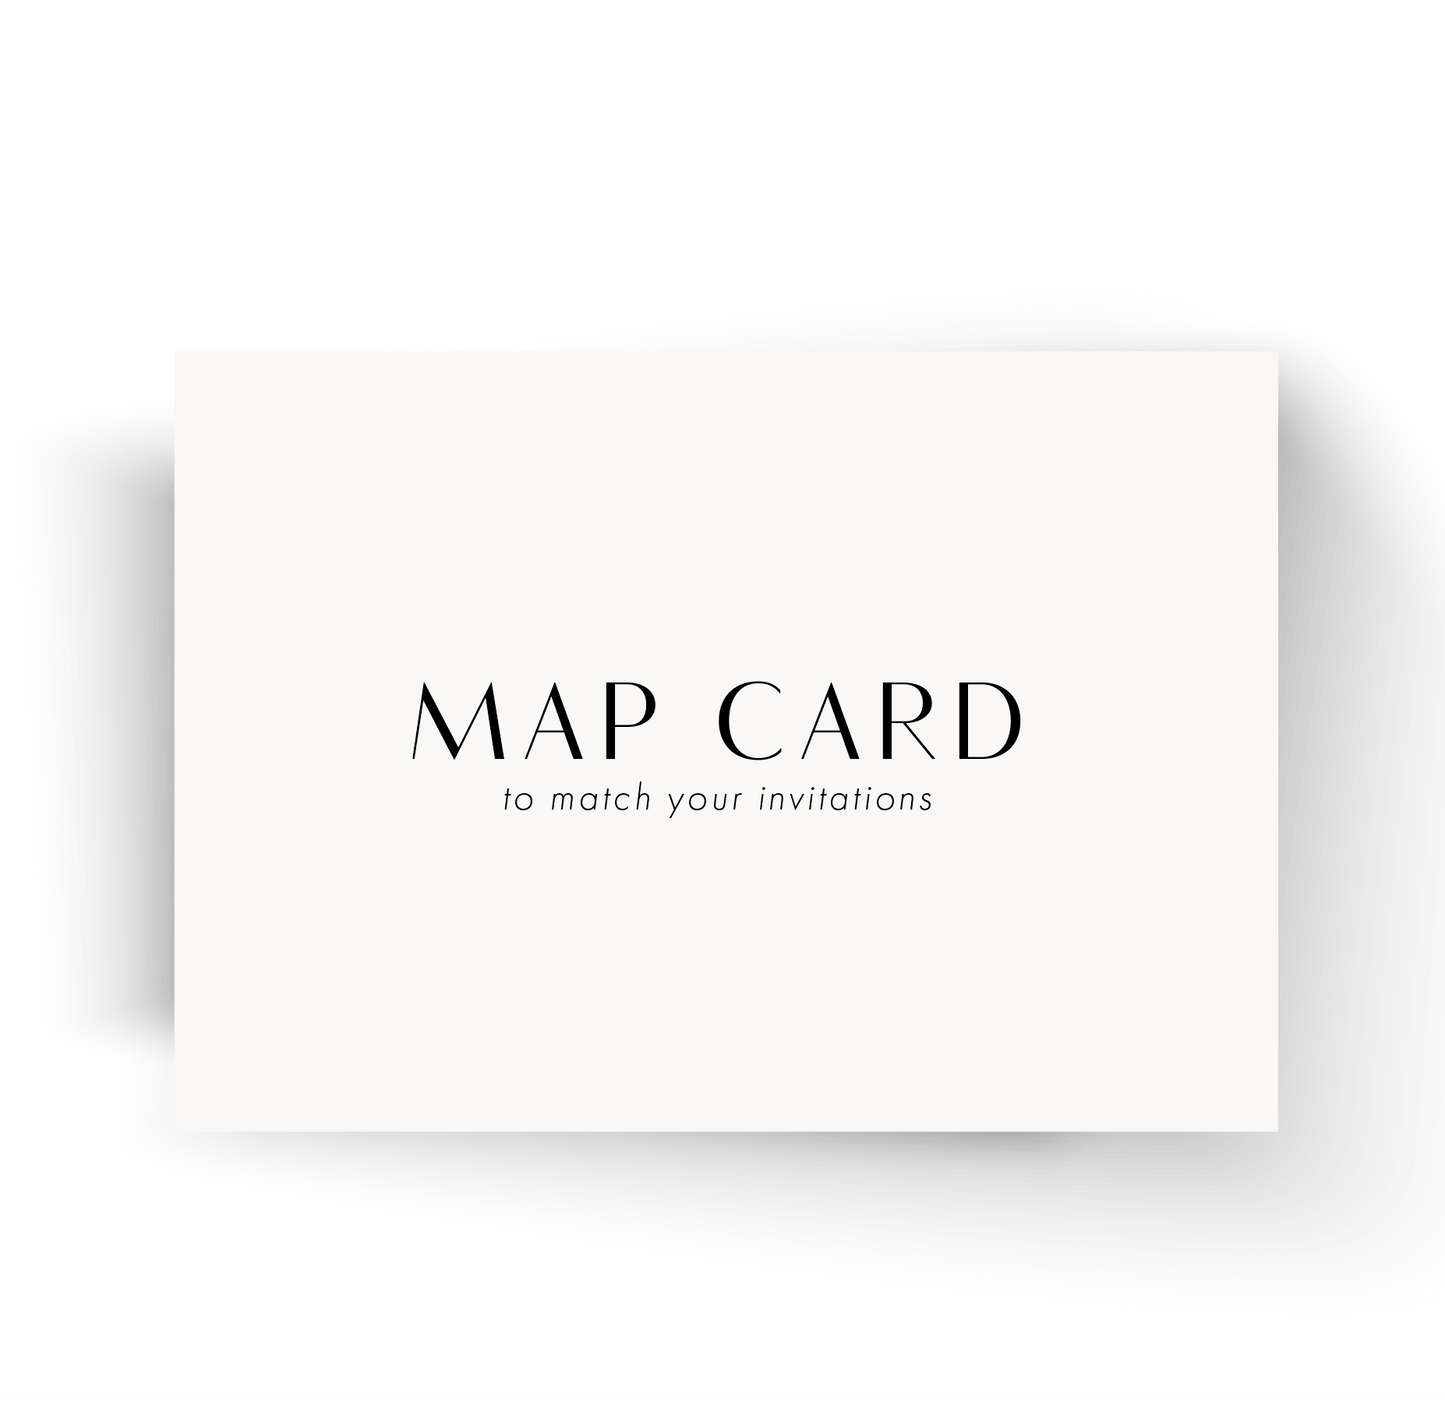 MAP CARD to match your invitations